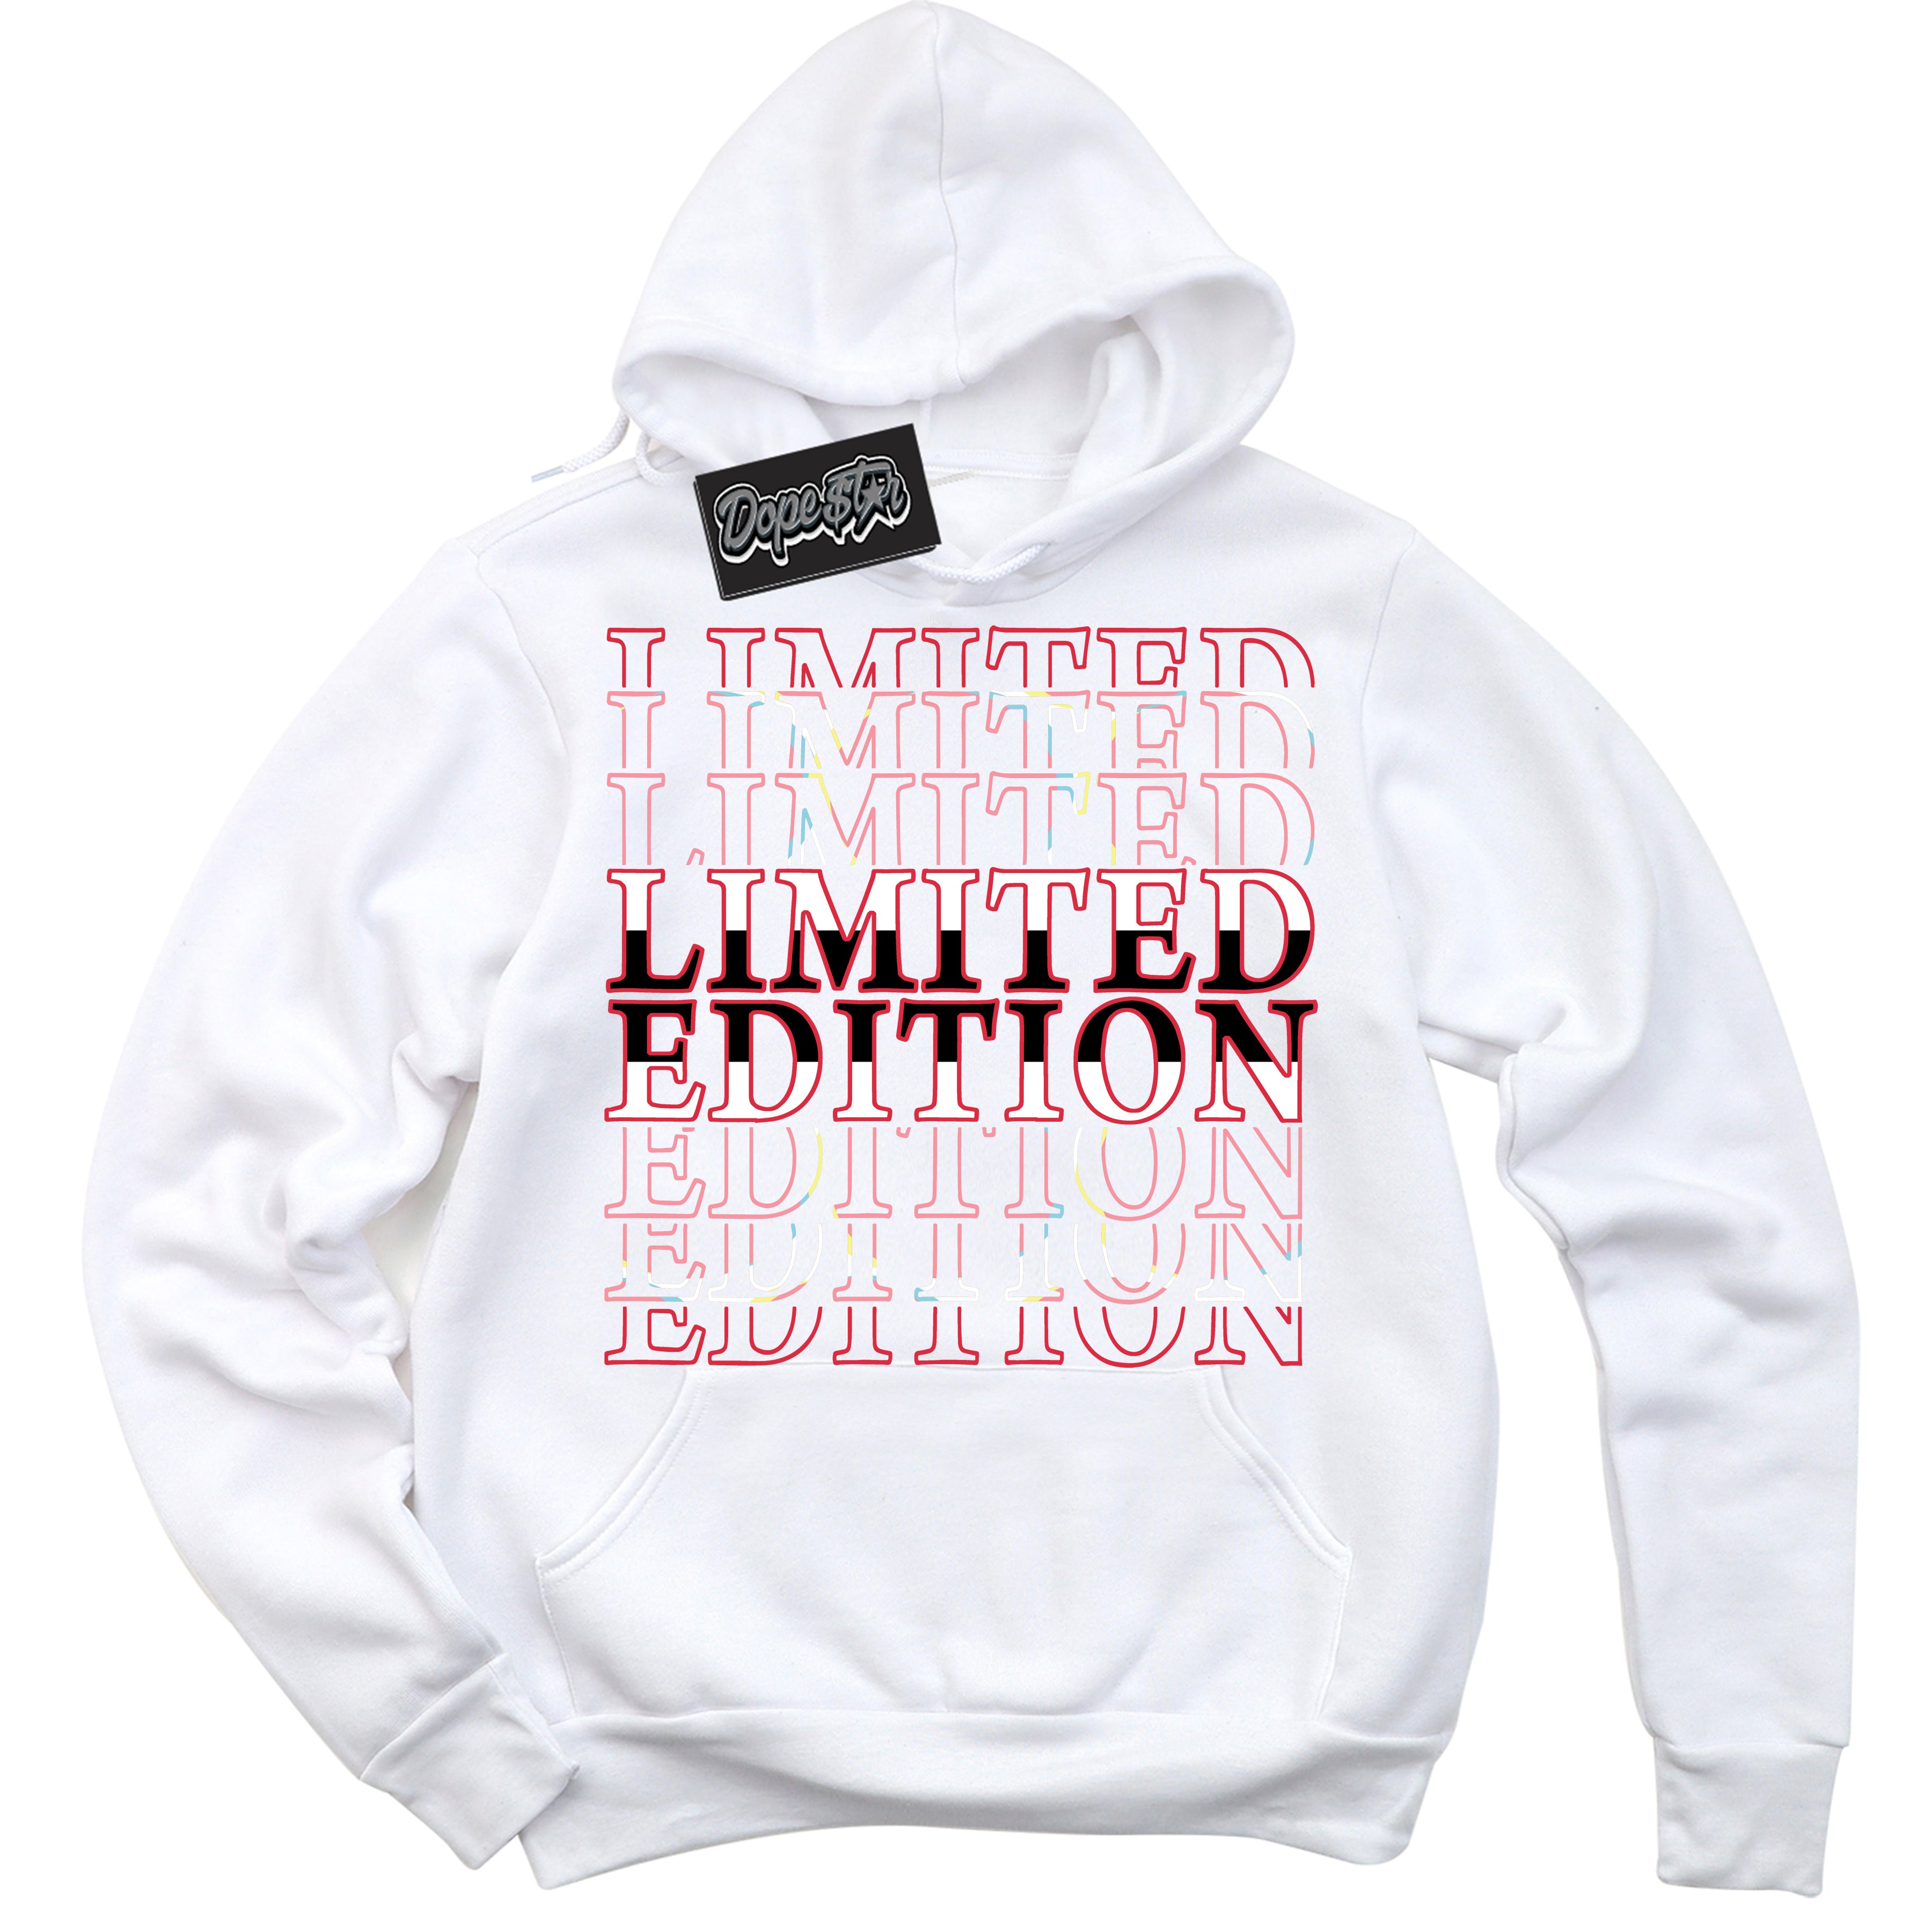 Cool White Graphic DopeStar Hoodie with “ Limited Edition “ print, that perfectly matches Spider-Verse 1s sneakers